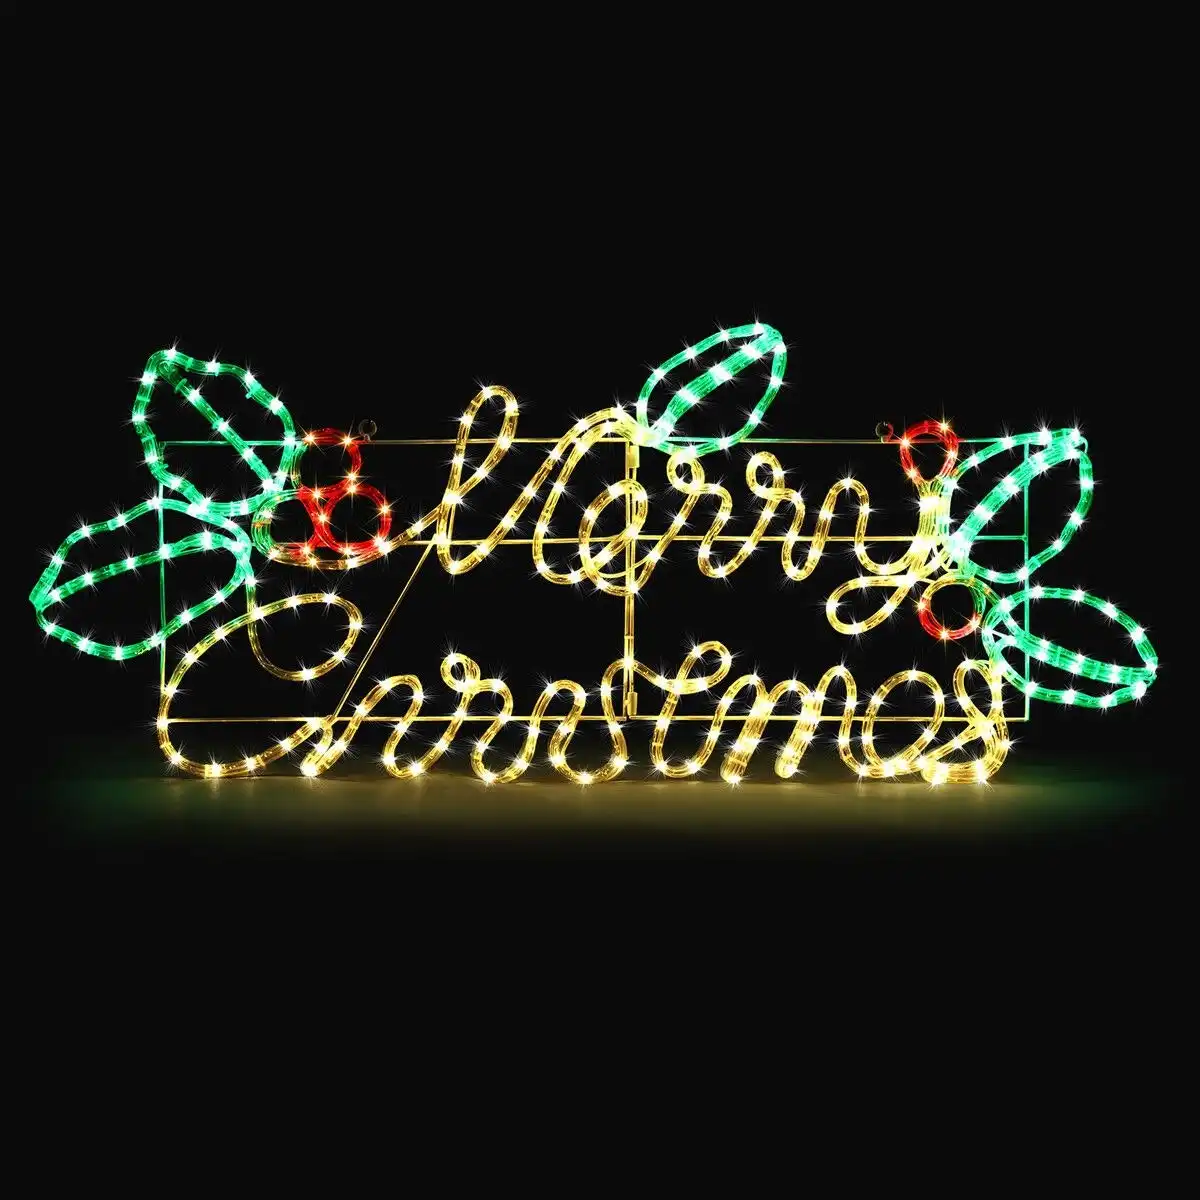 Solight Merry Christmas Light LED Strip Rope Xmas Decor Holiday Ornament Outdoor Indoor Colourful 115x46cm L Size